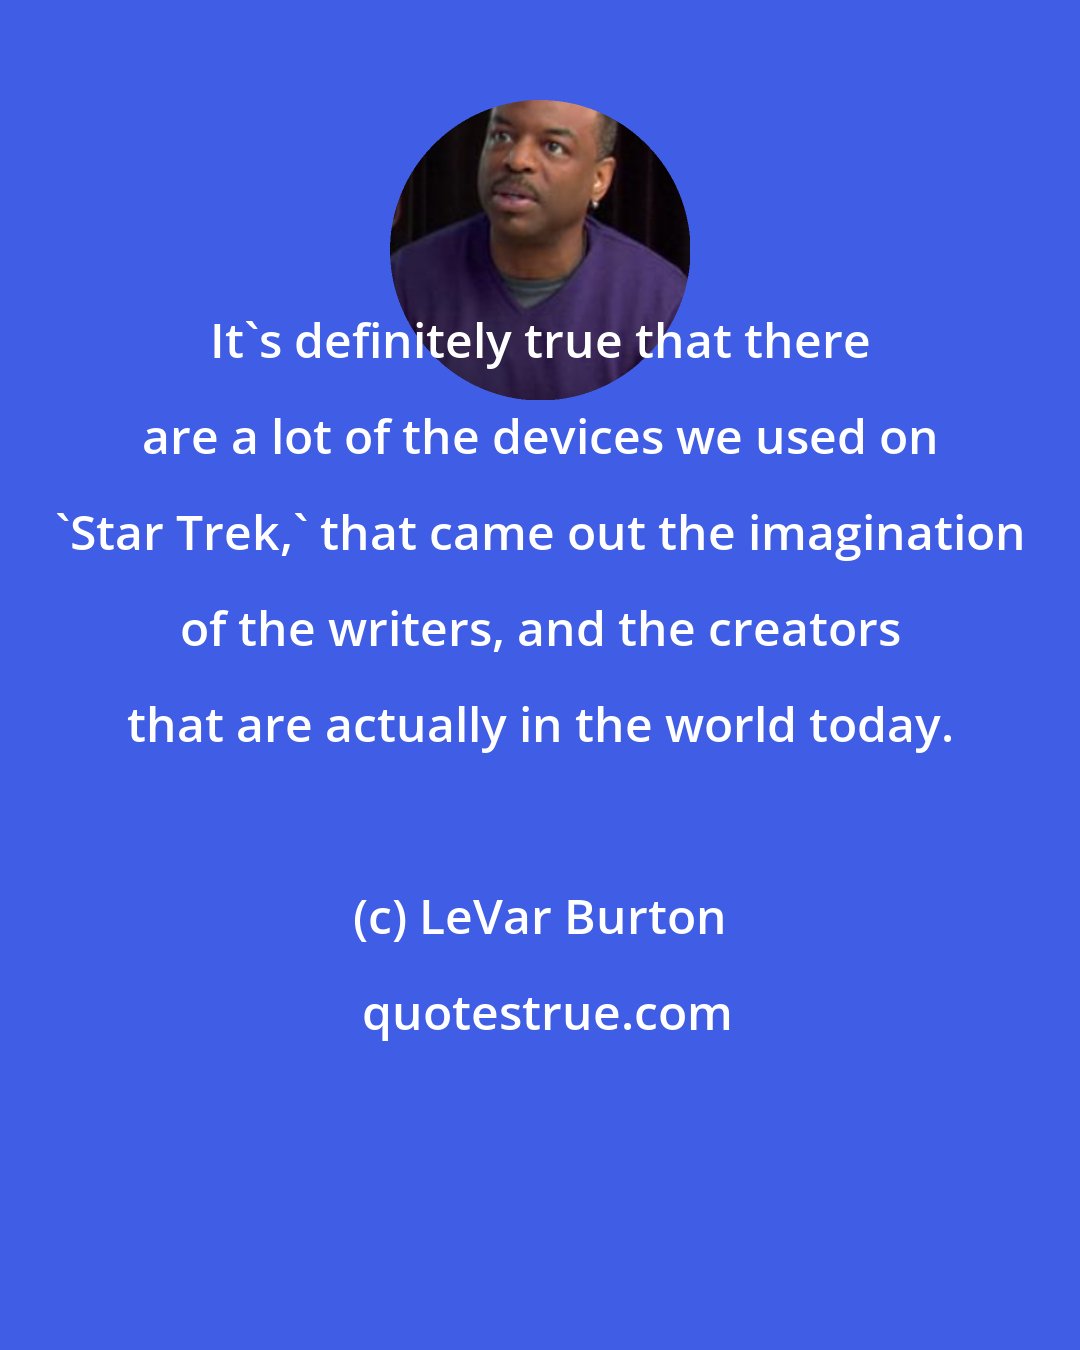 LeVar Burton: It's definitely true that there are a lot of the devices we used on 'Star Trek,' that came out the imagination of the writers, and the creators that are actually in the world today.